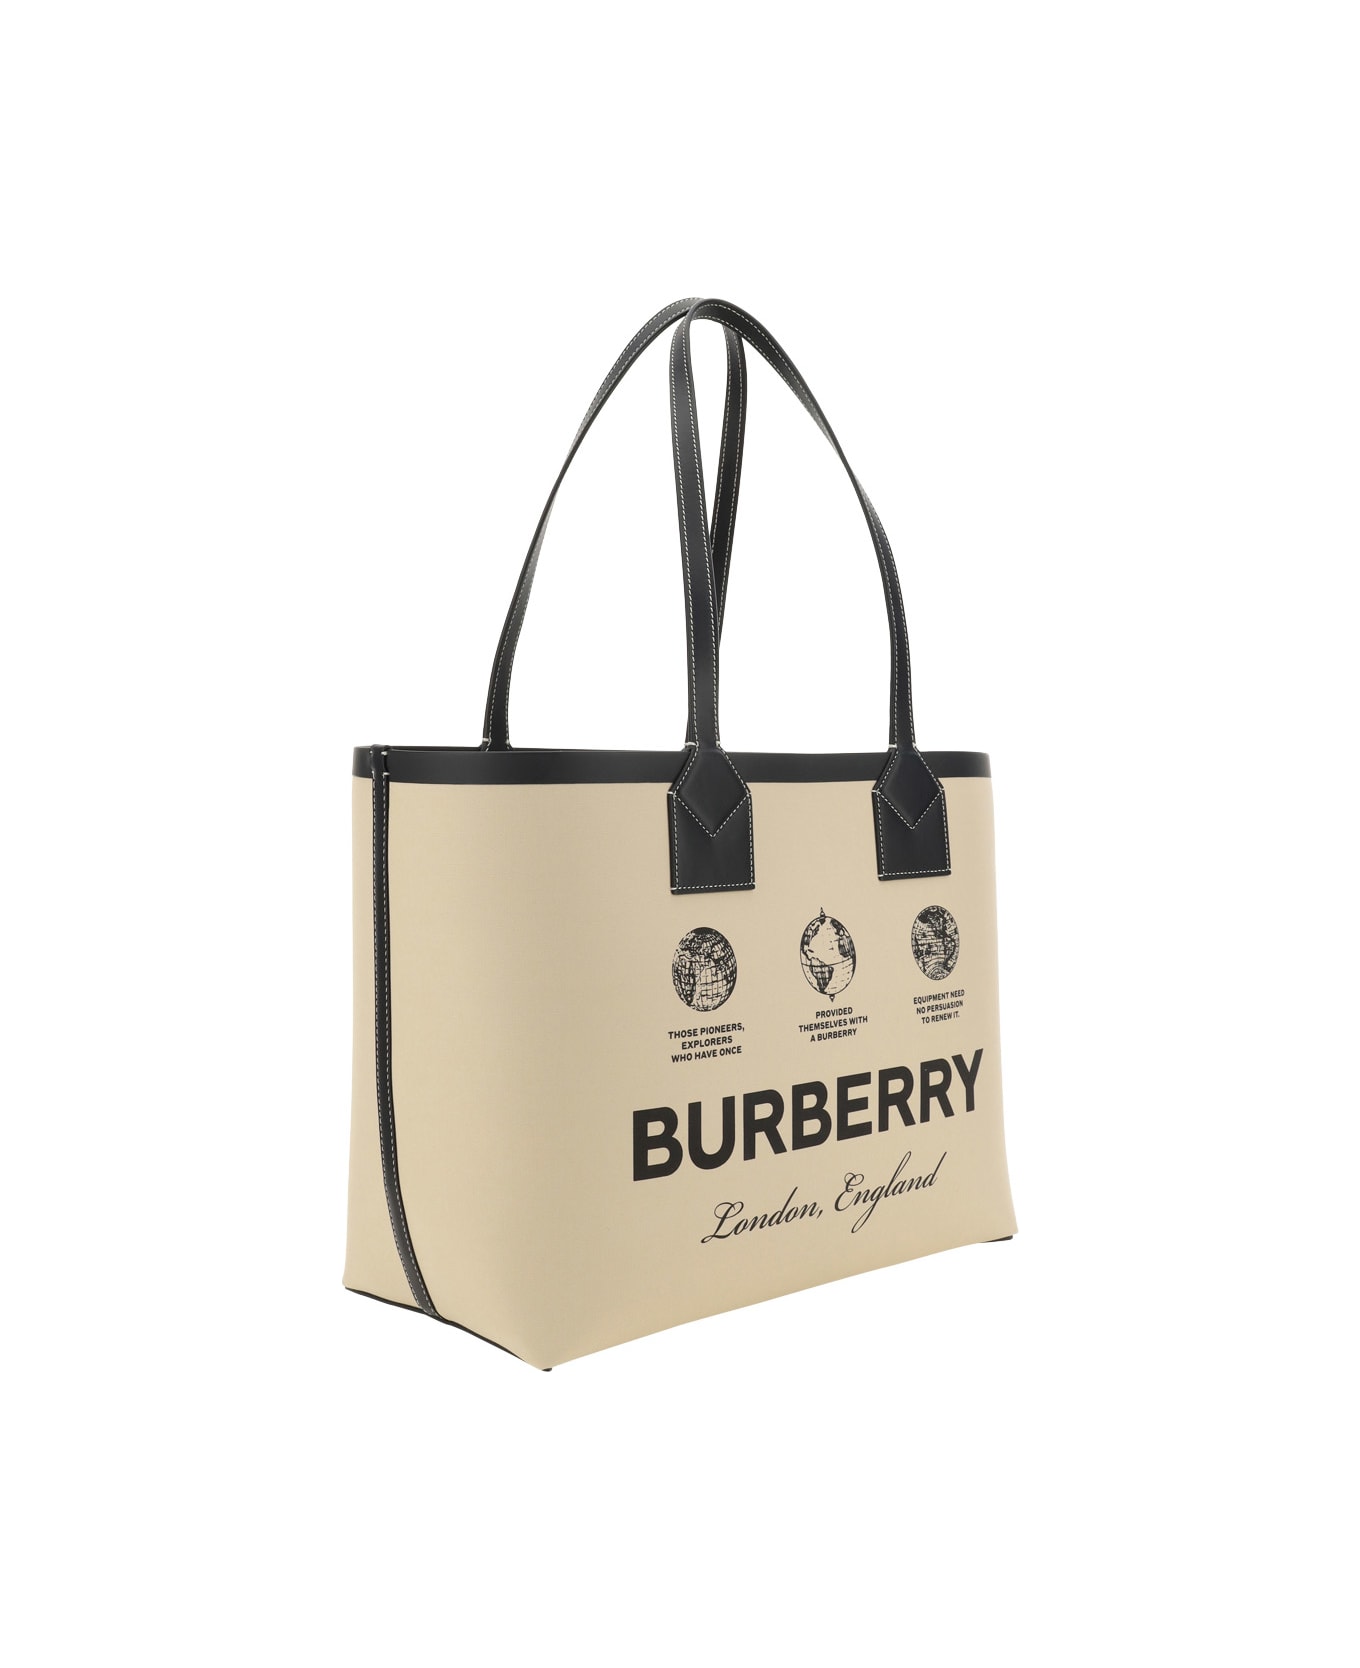 Burberry Heritage Shopping Bag - Beige